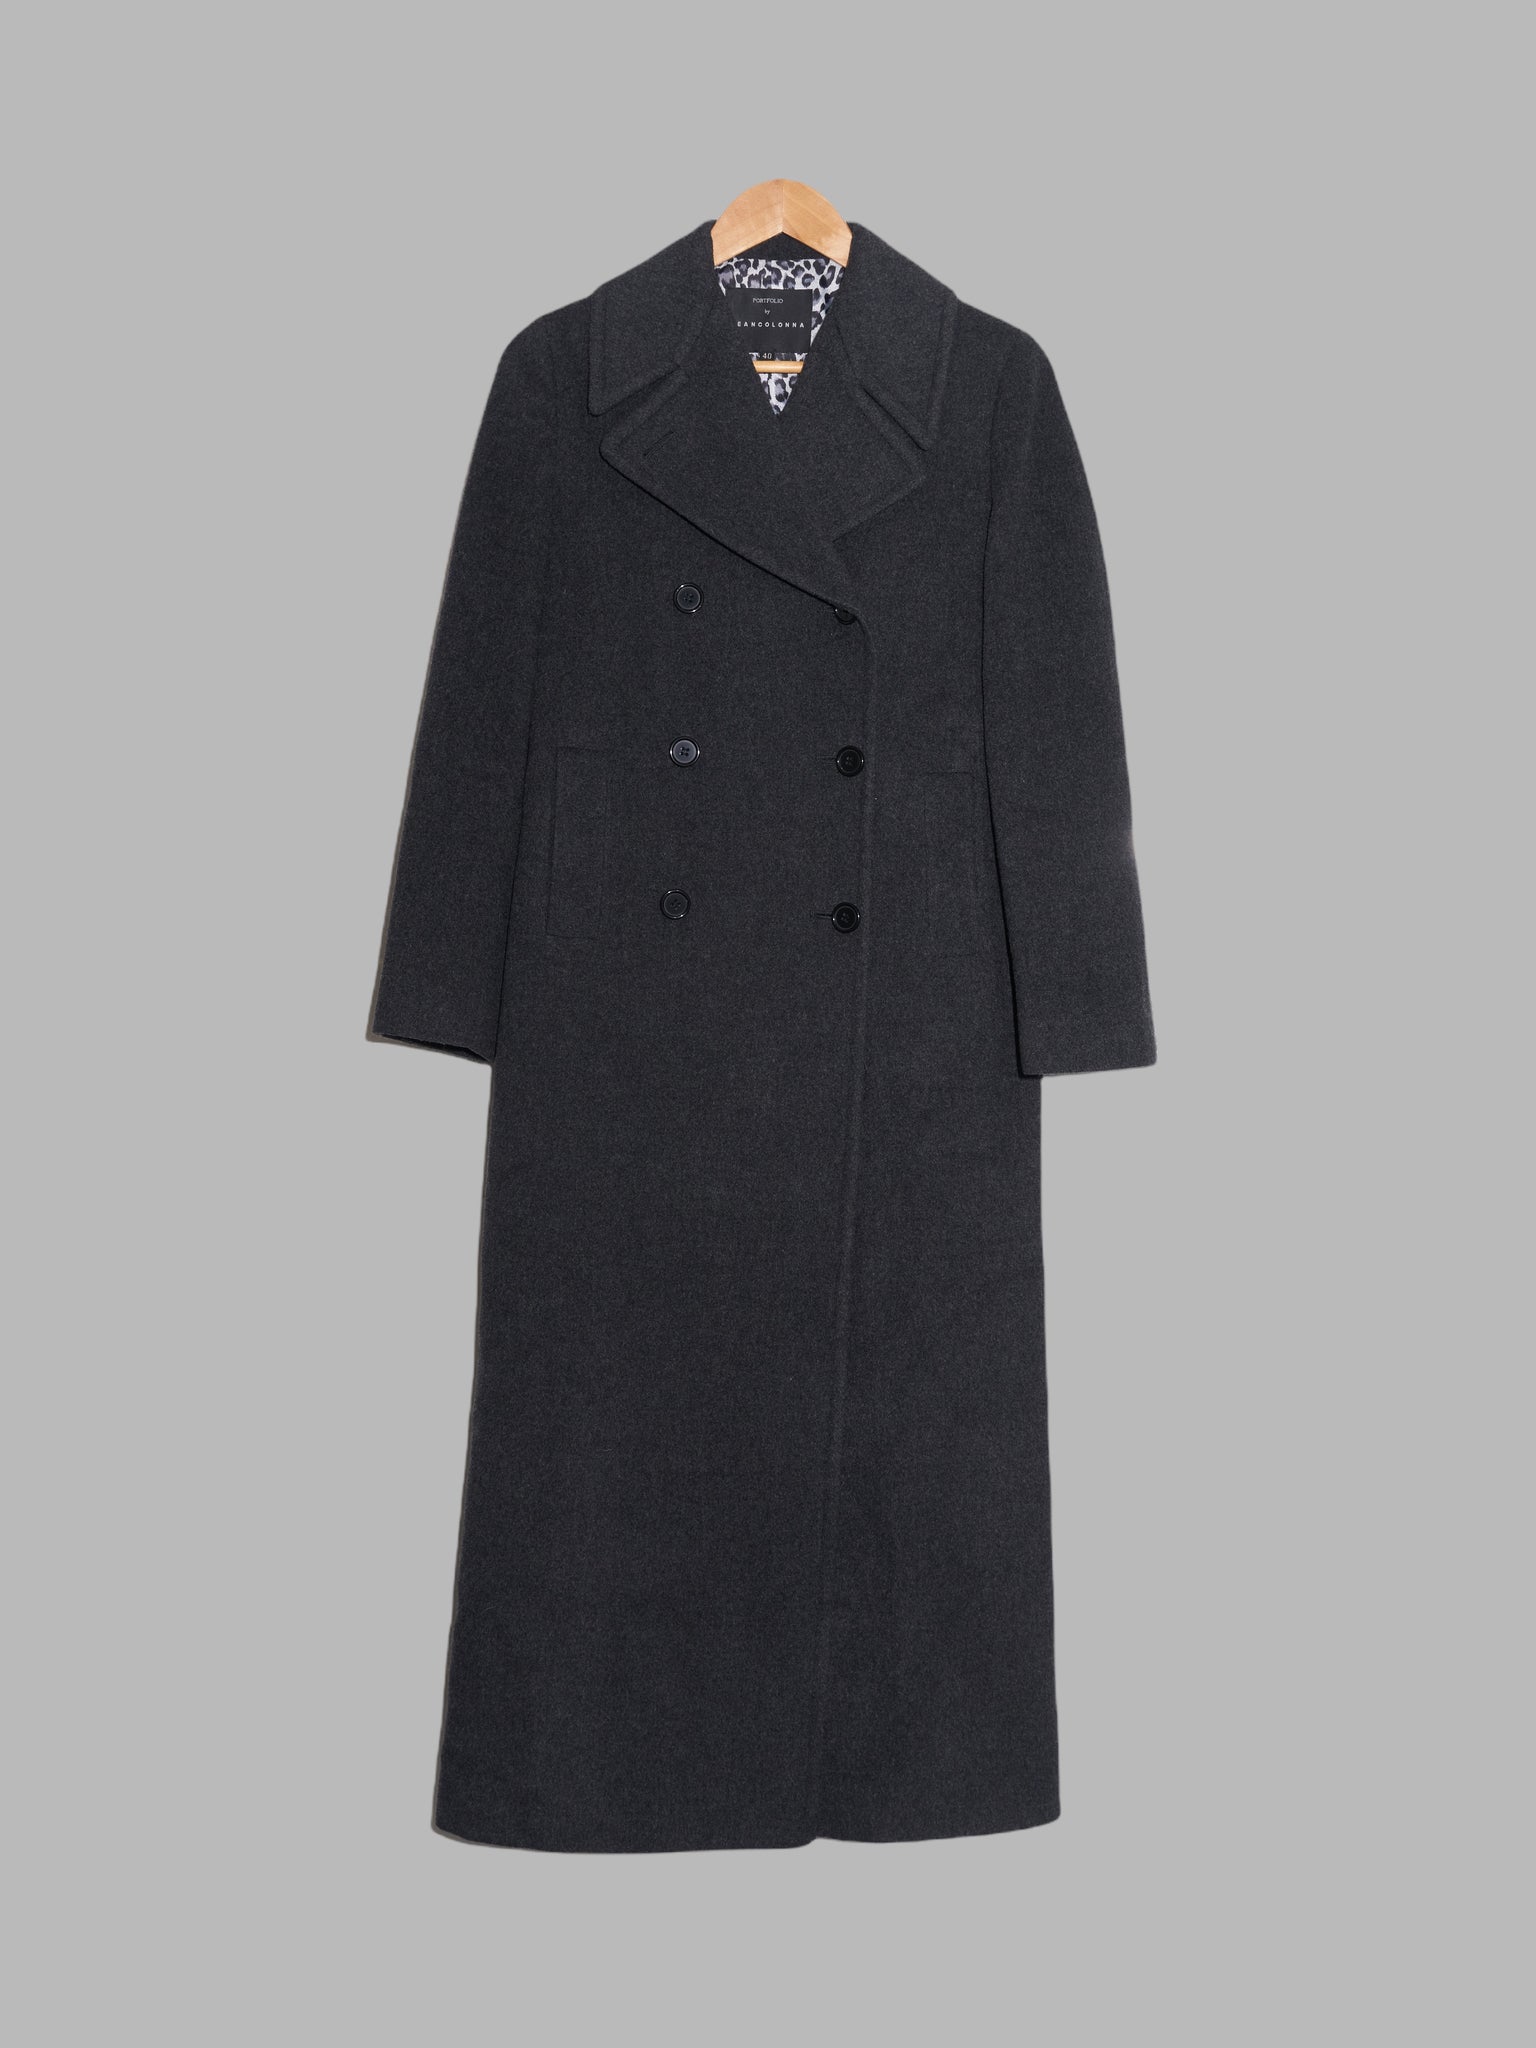 Portfolio by Jean Colonna grey melton wool overcoat with leopard print lining